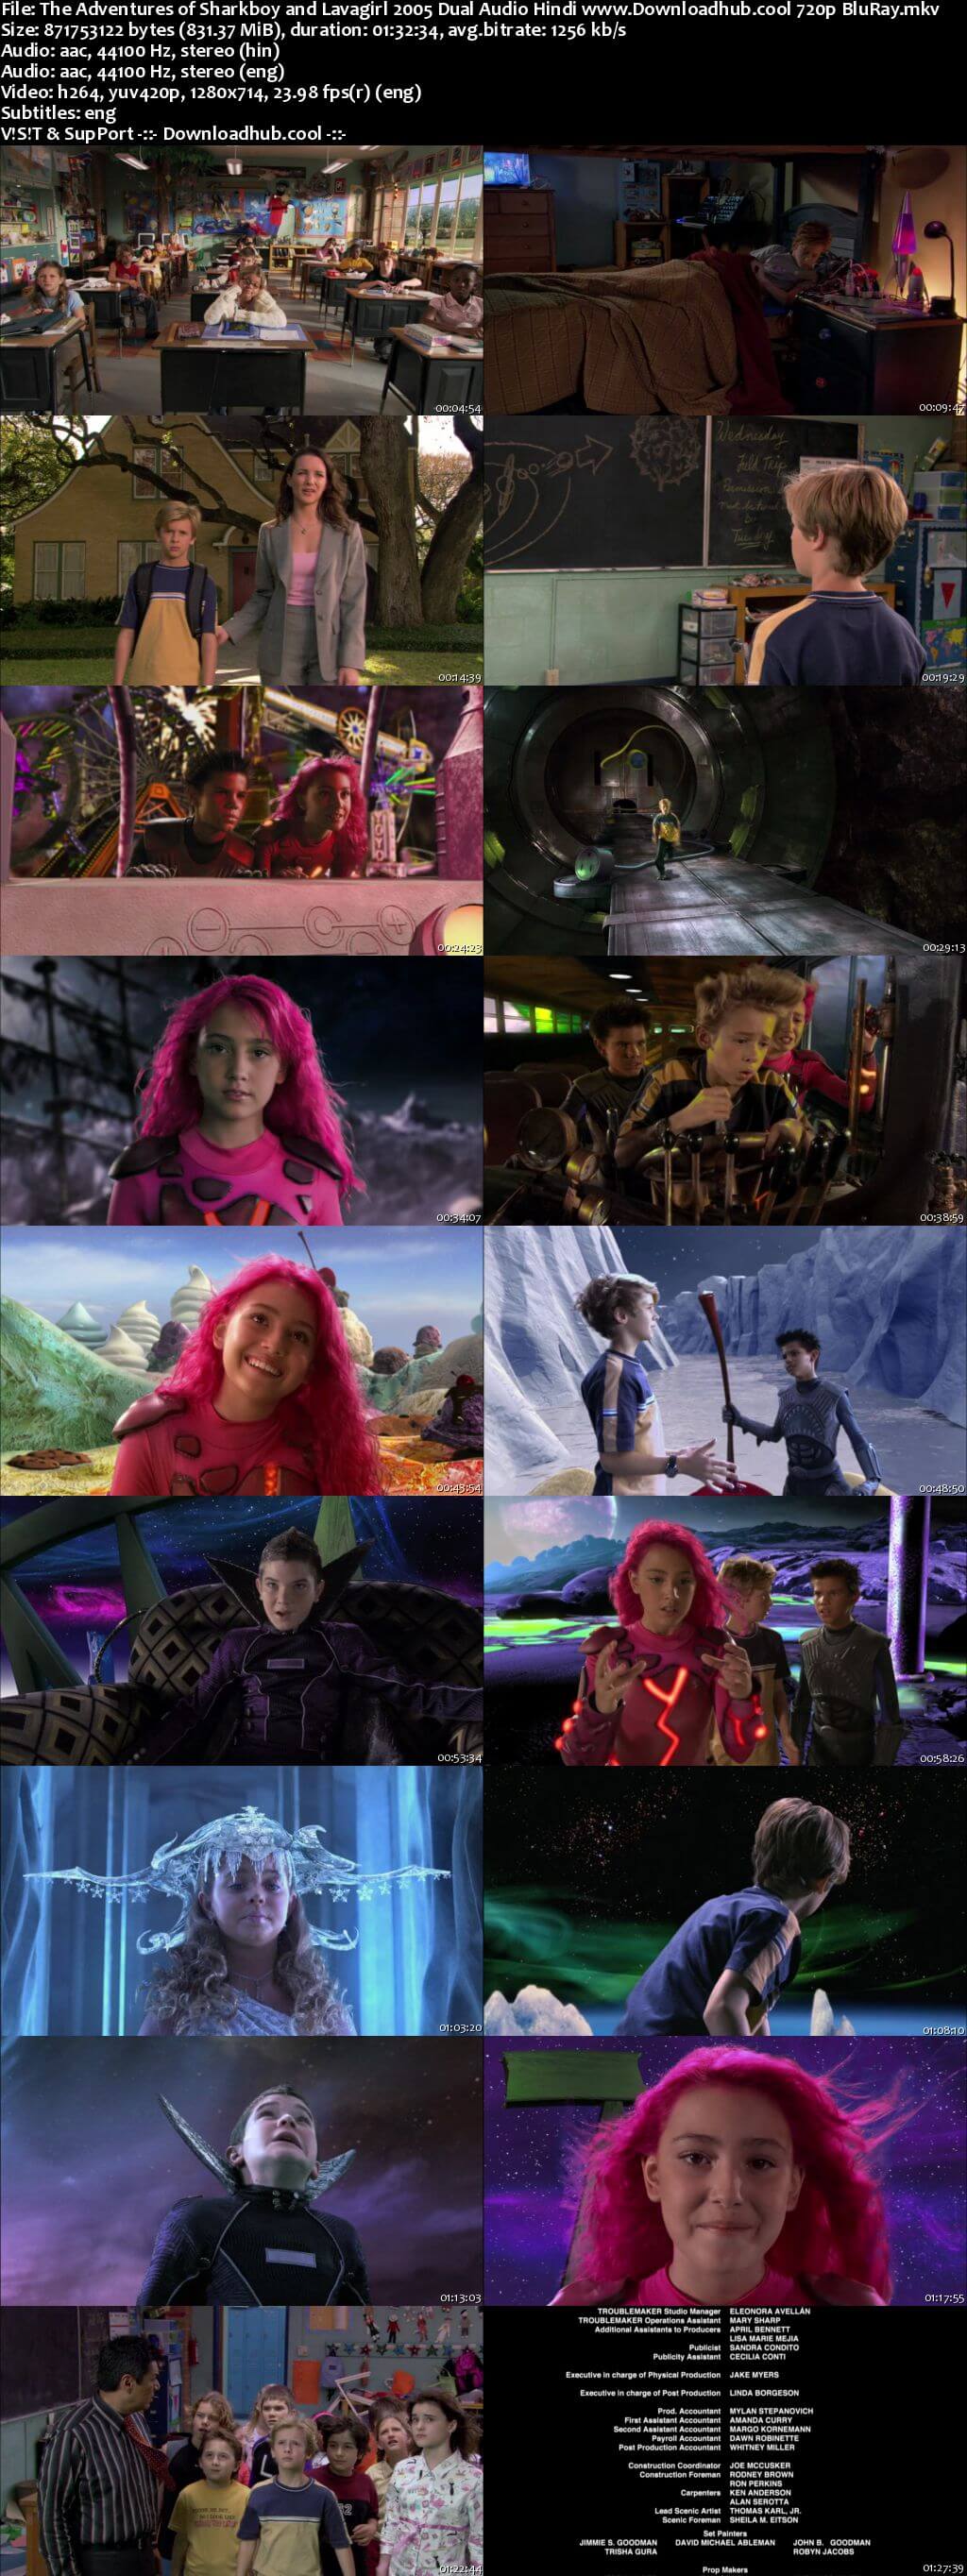 The Adventures of Sharkboy and Lavagirl 2005 Hindi Dual Audio 720p BluRay ESubs